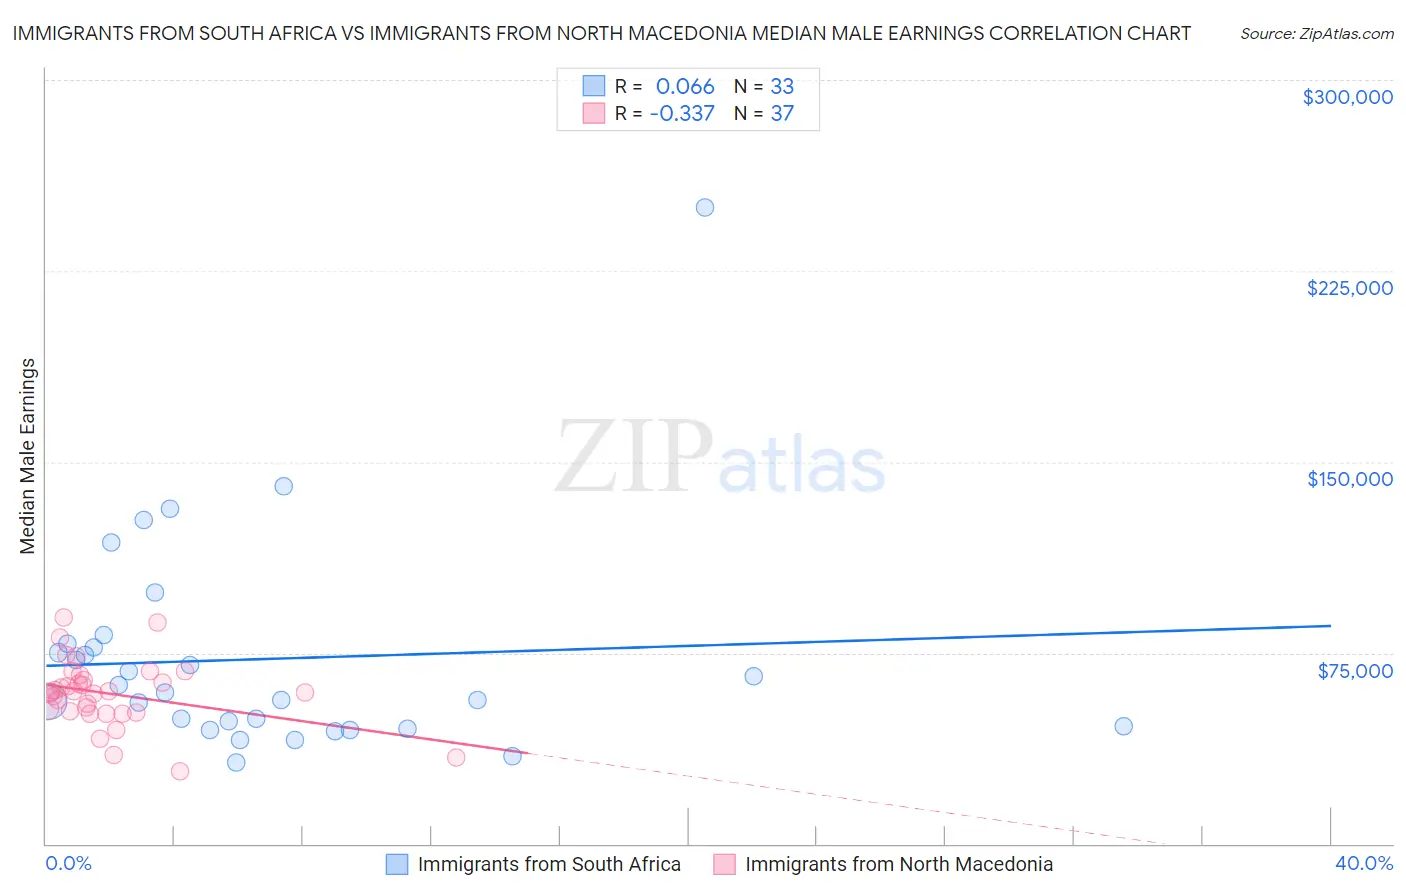 Immigrants from South Africa vs Immigrants from North Macedonia Median Male Earnings